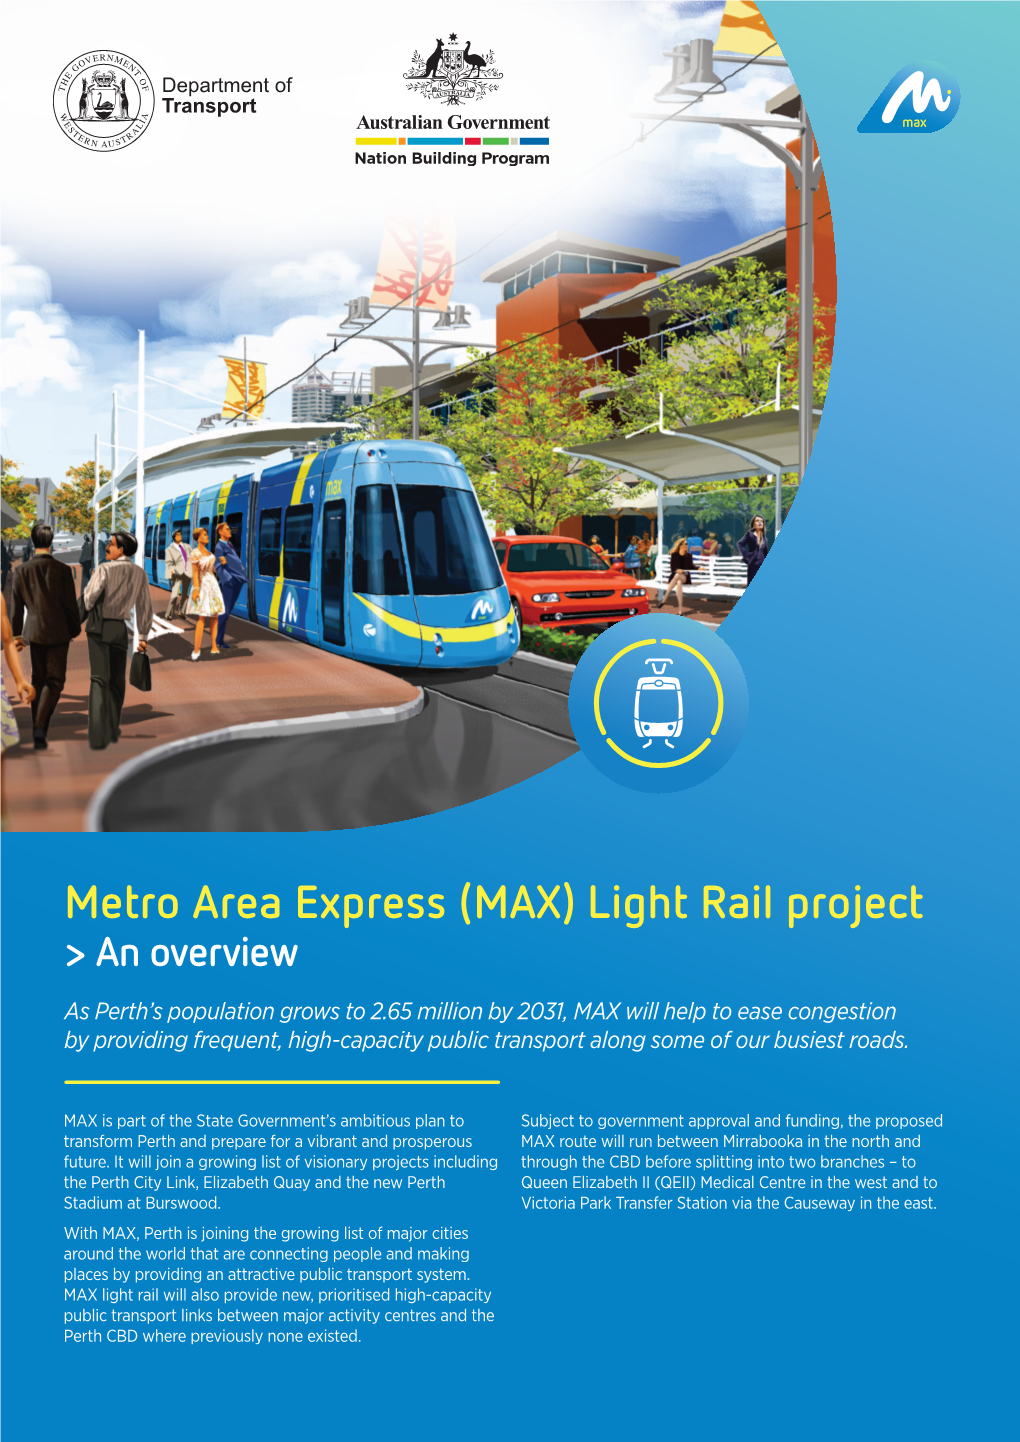 Metro Area Express (MAX) Light Rail Project > an Overview